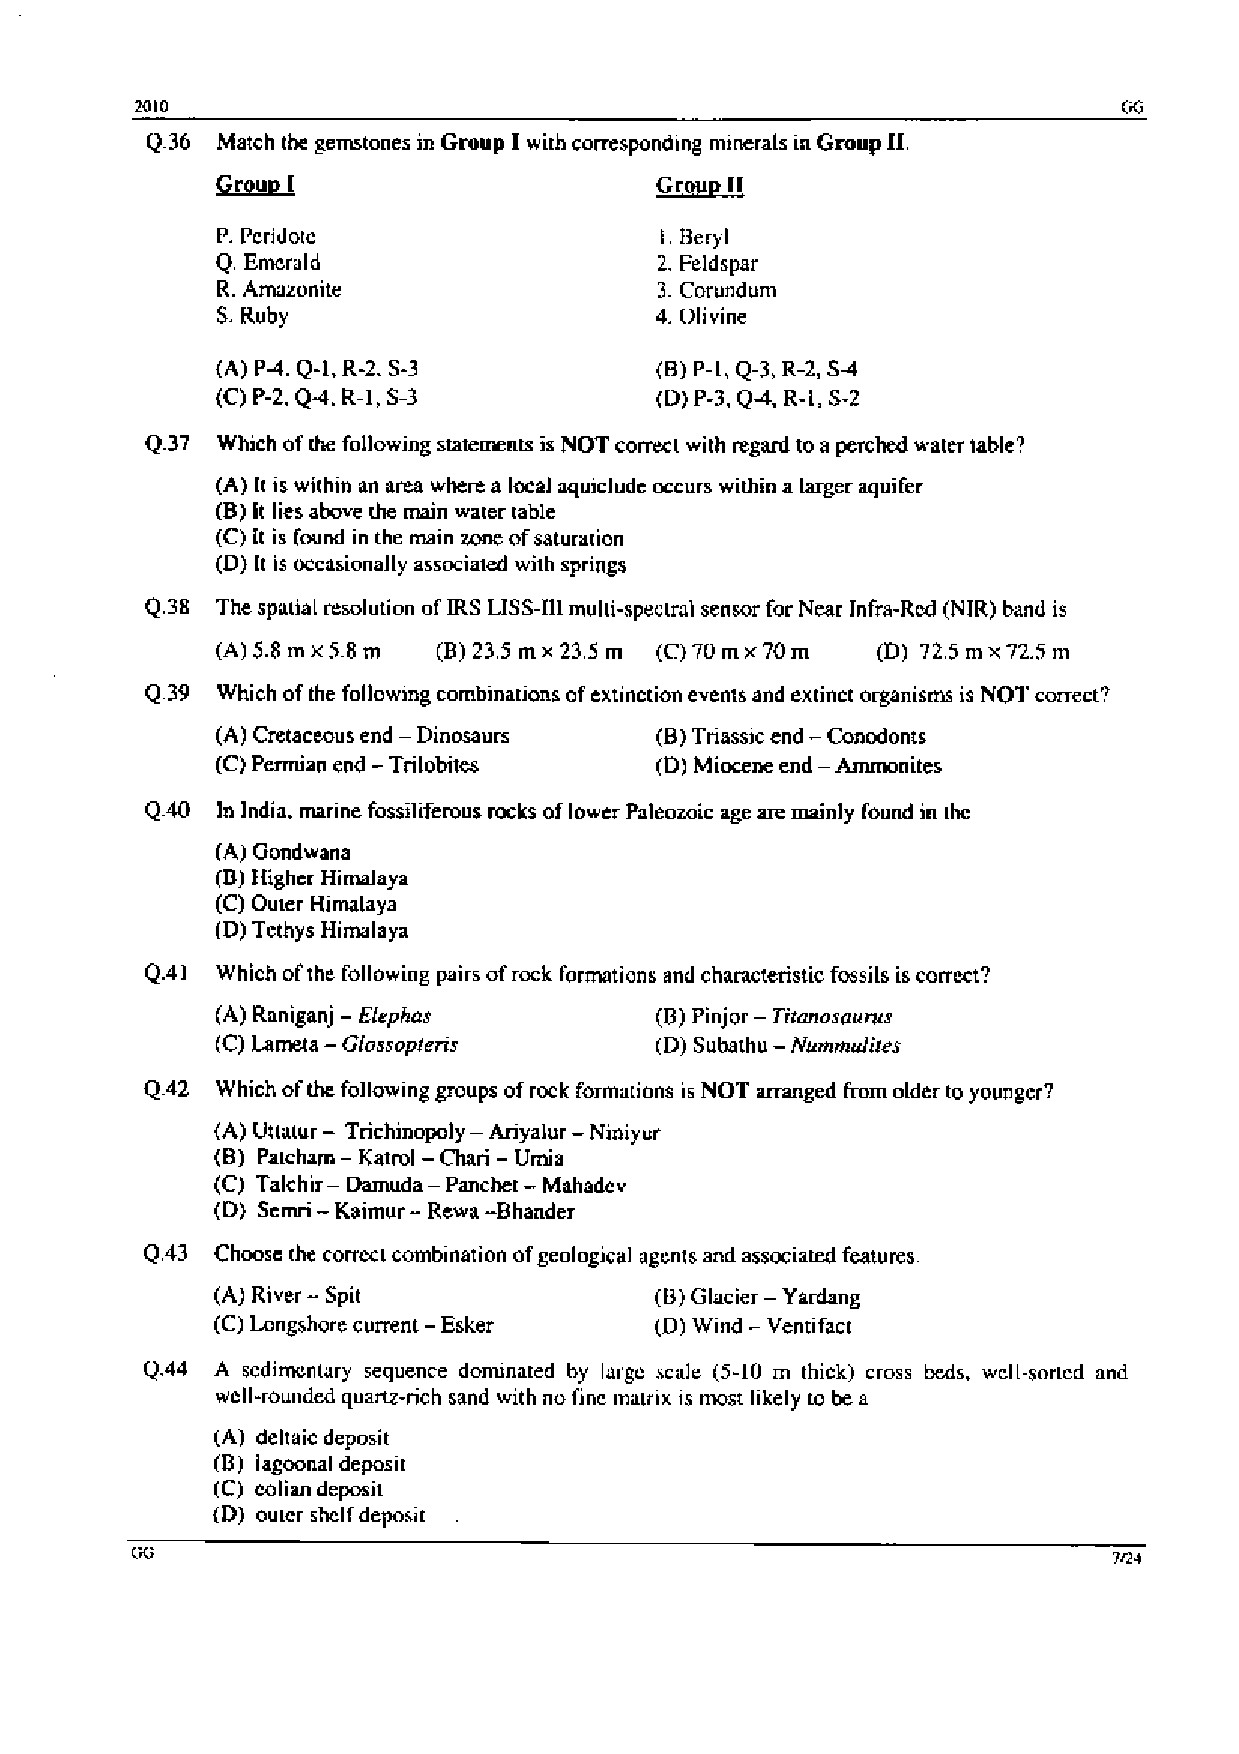 GATE Exam Question Paper 2010 Geology and Geophysics 7